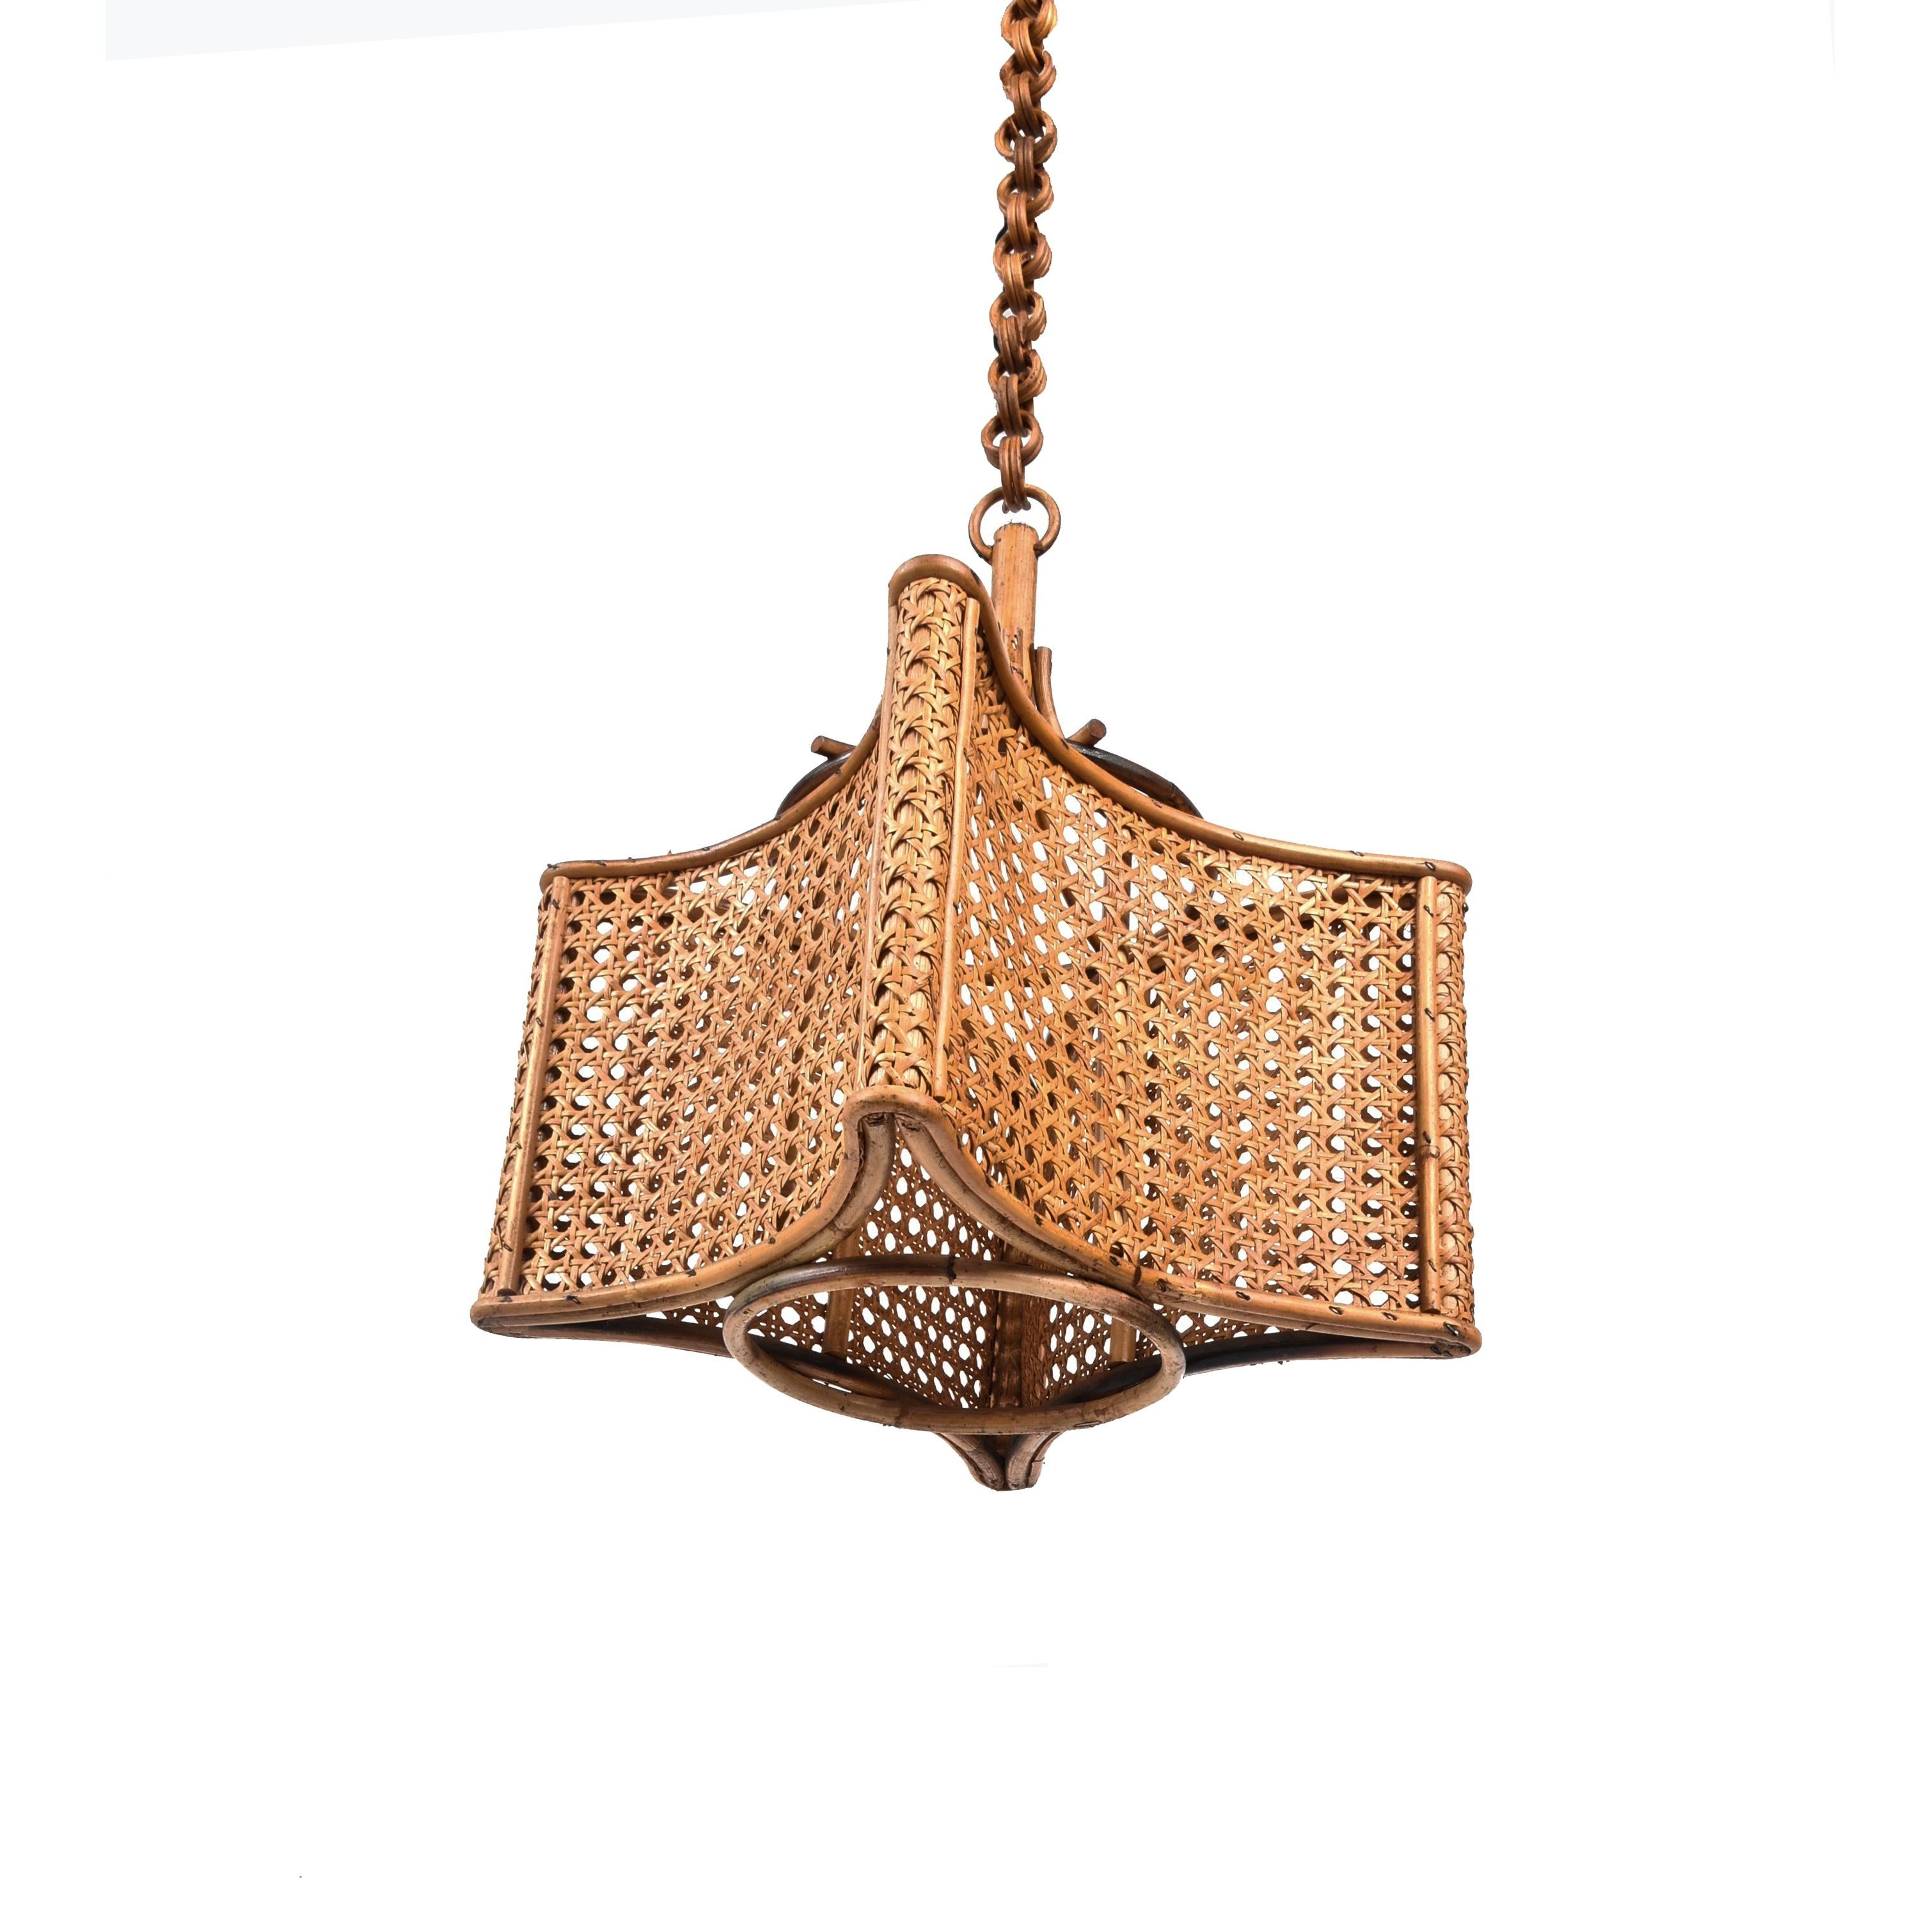 Wicker Midcentury French Riviera Bambo and Rattan Square Italian Chandelier, 1960s